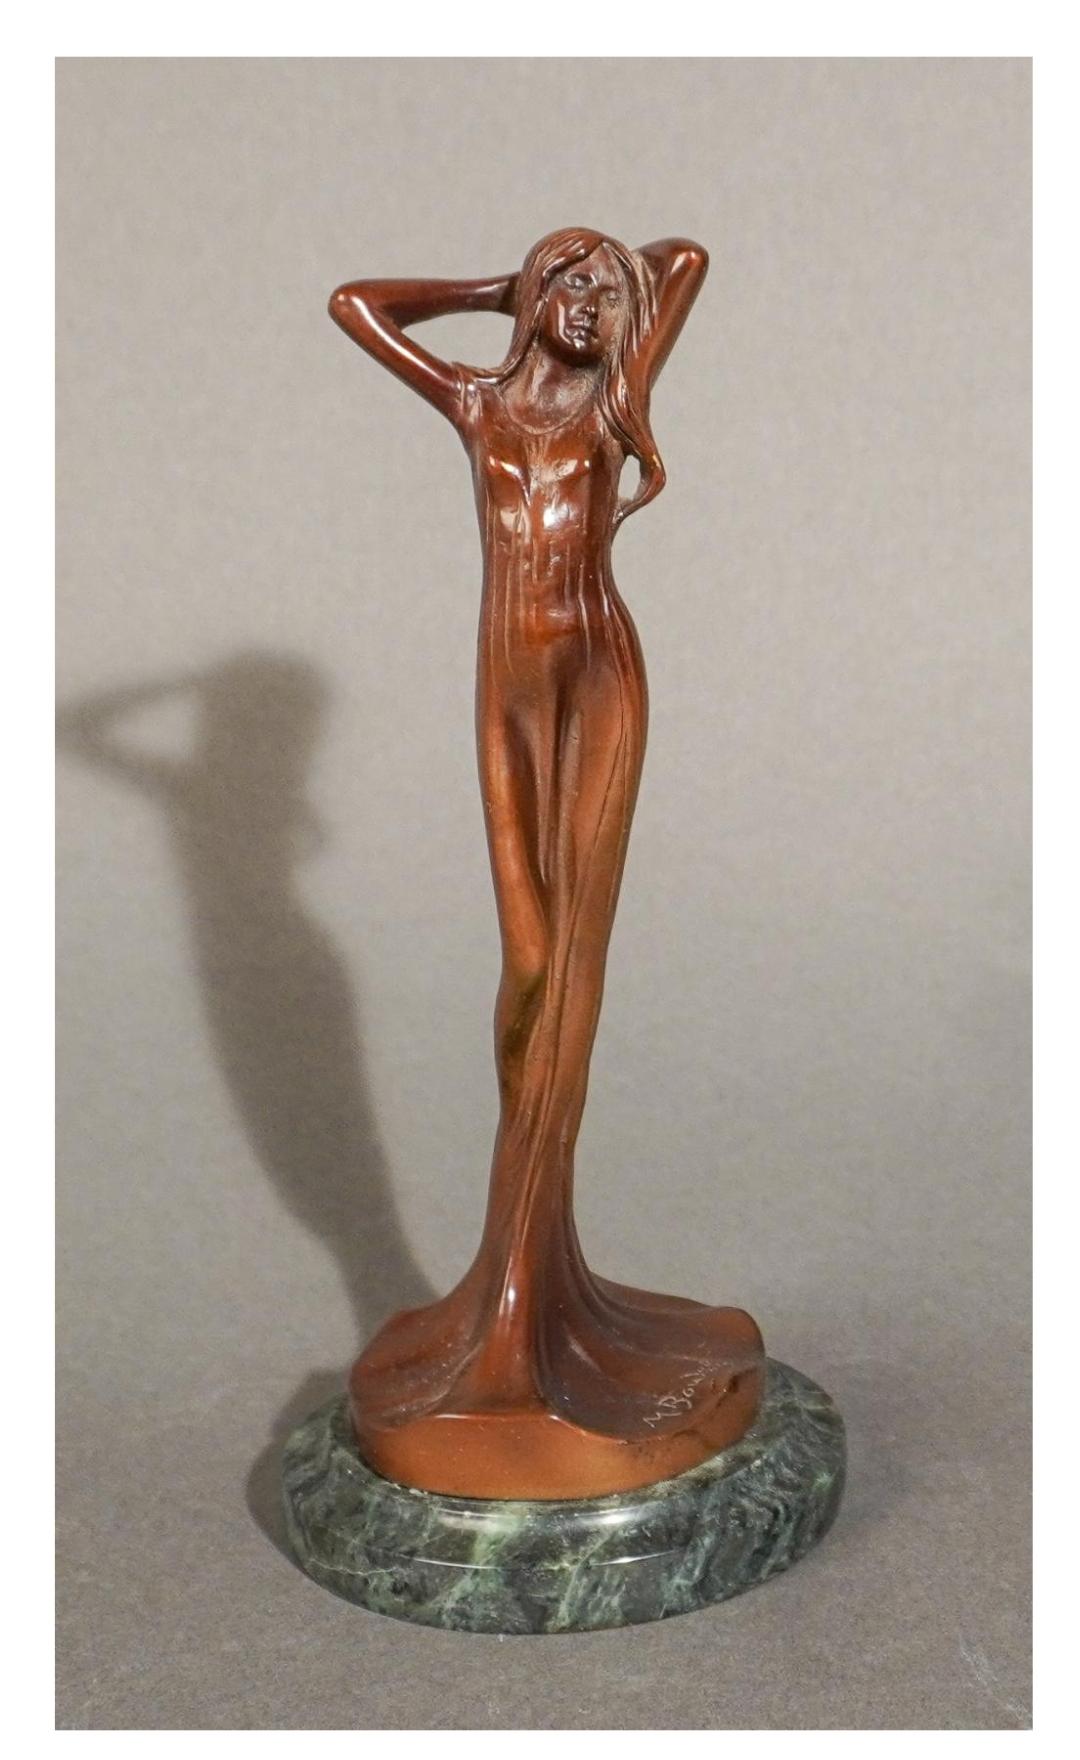 Metalwork Maurice Bouval (French 1863 - 1916), Patinated Bronze Of An Art Nouveau Woman For Sale